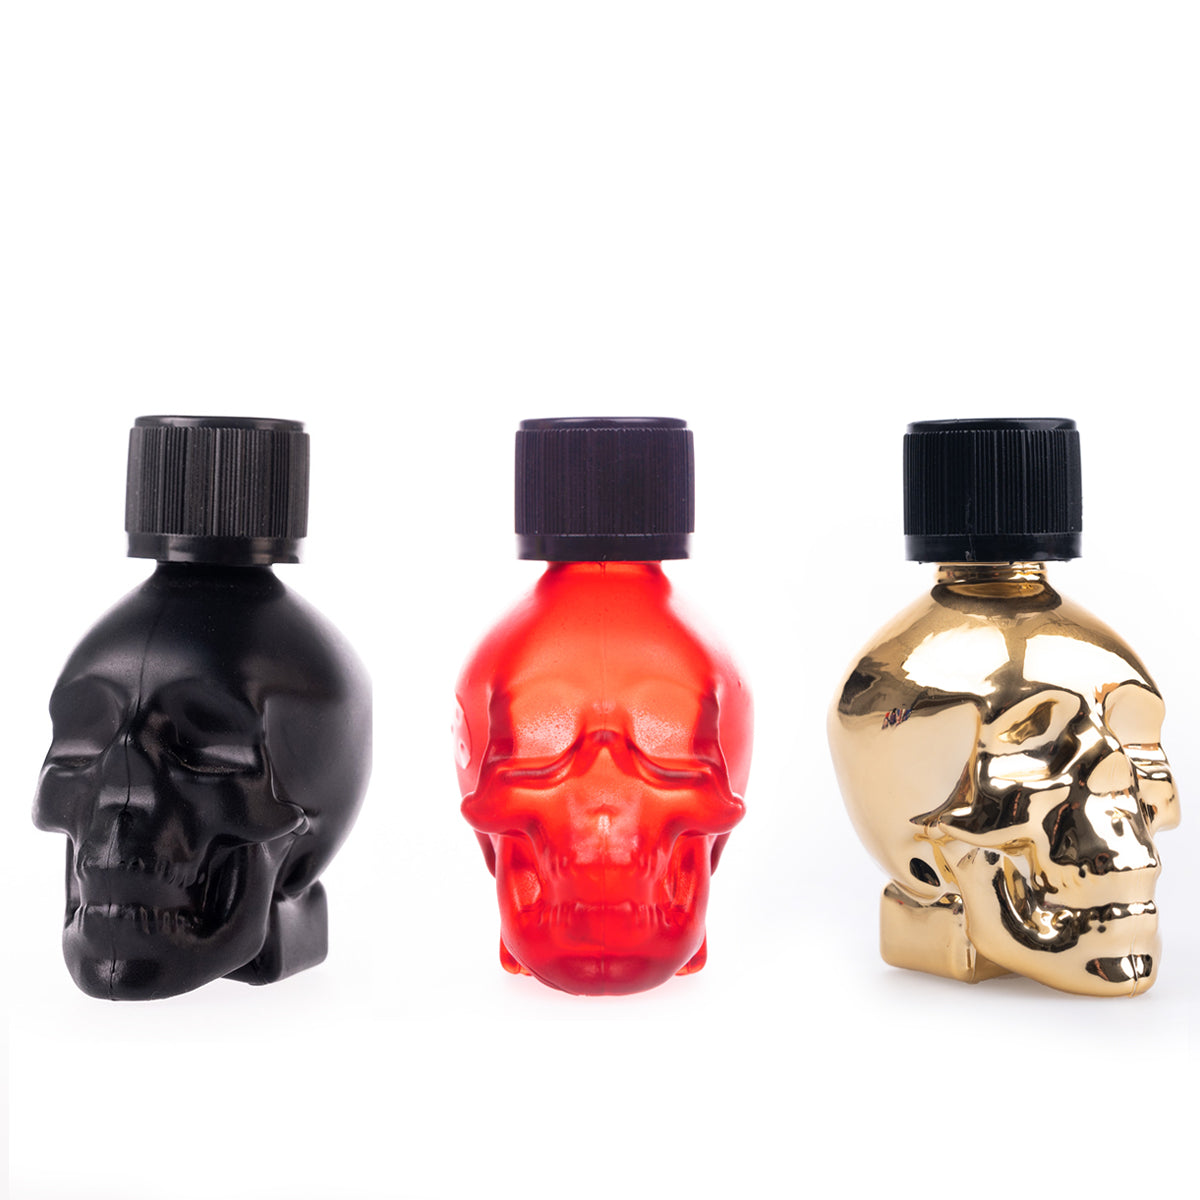 SKULL FUCK TRINITY, POPPERS UK, POPPERS USA, FREE DELIVERY, NEXT DAY DELIVERY